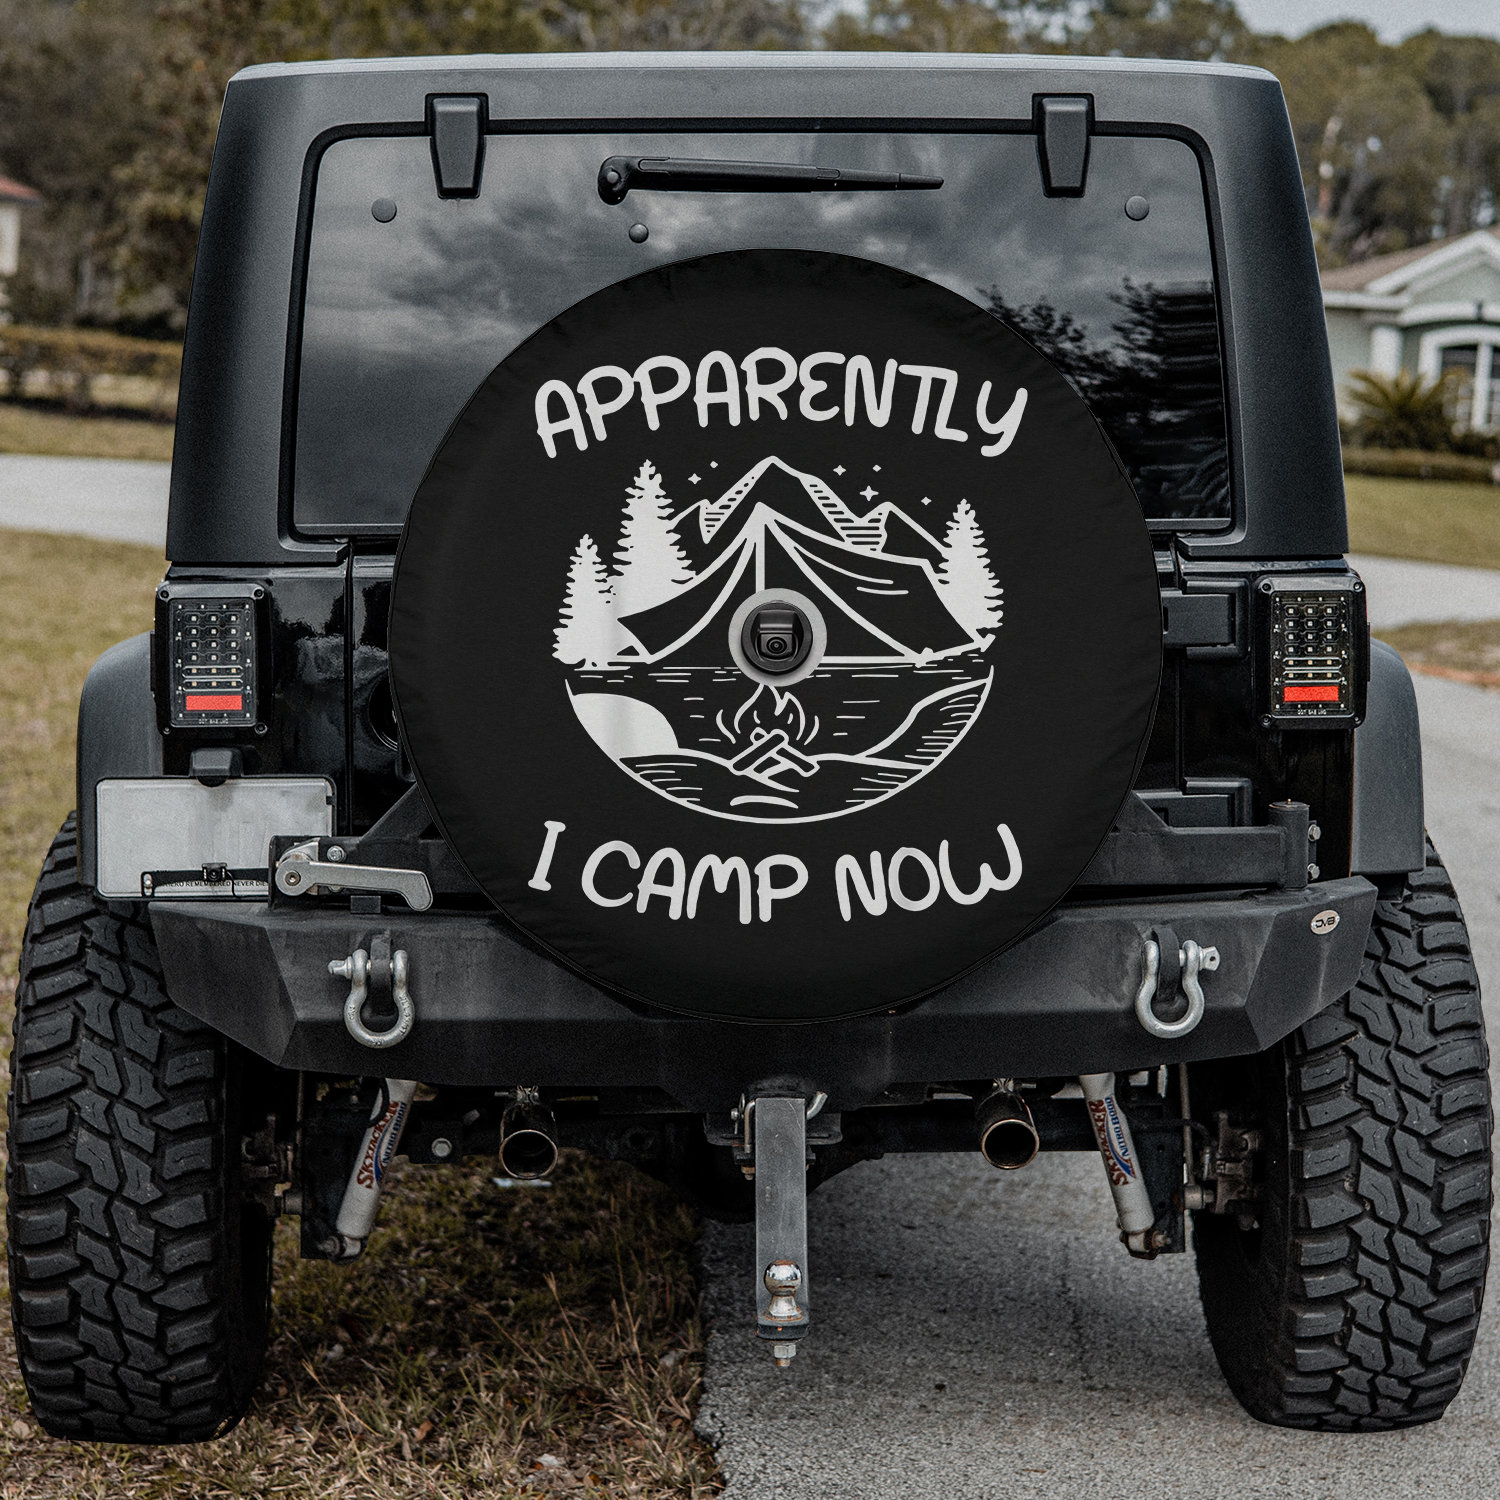 Funny Camping Gifts Apparently I Camp Now Spare Tire Cover Designed  Sold  By Substantial Bossk Rose